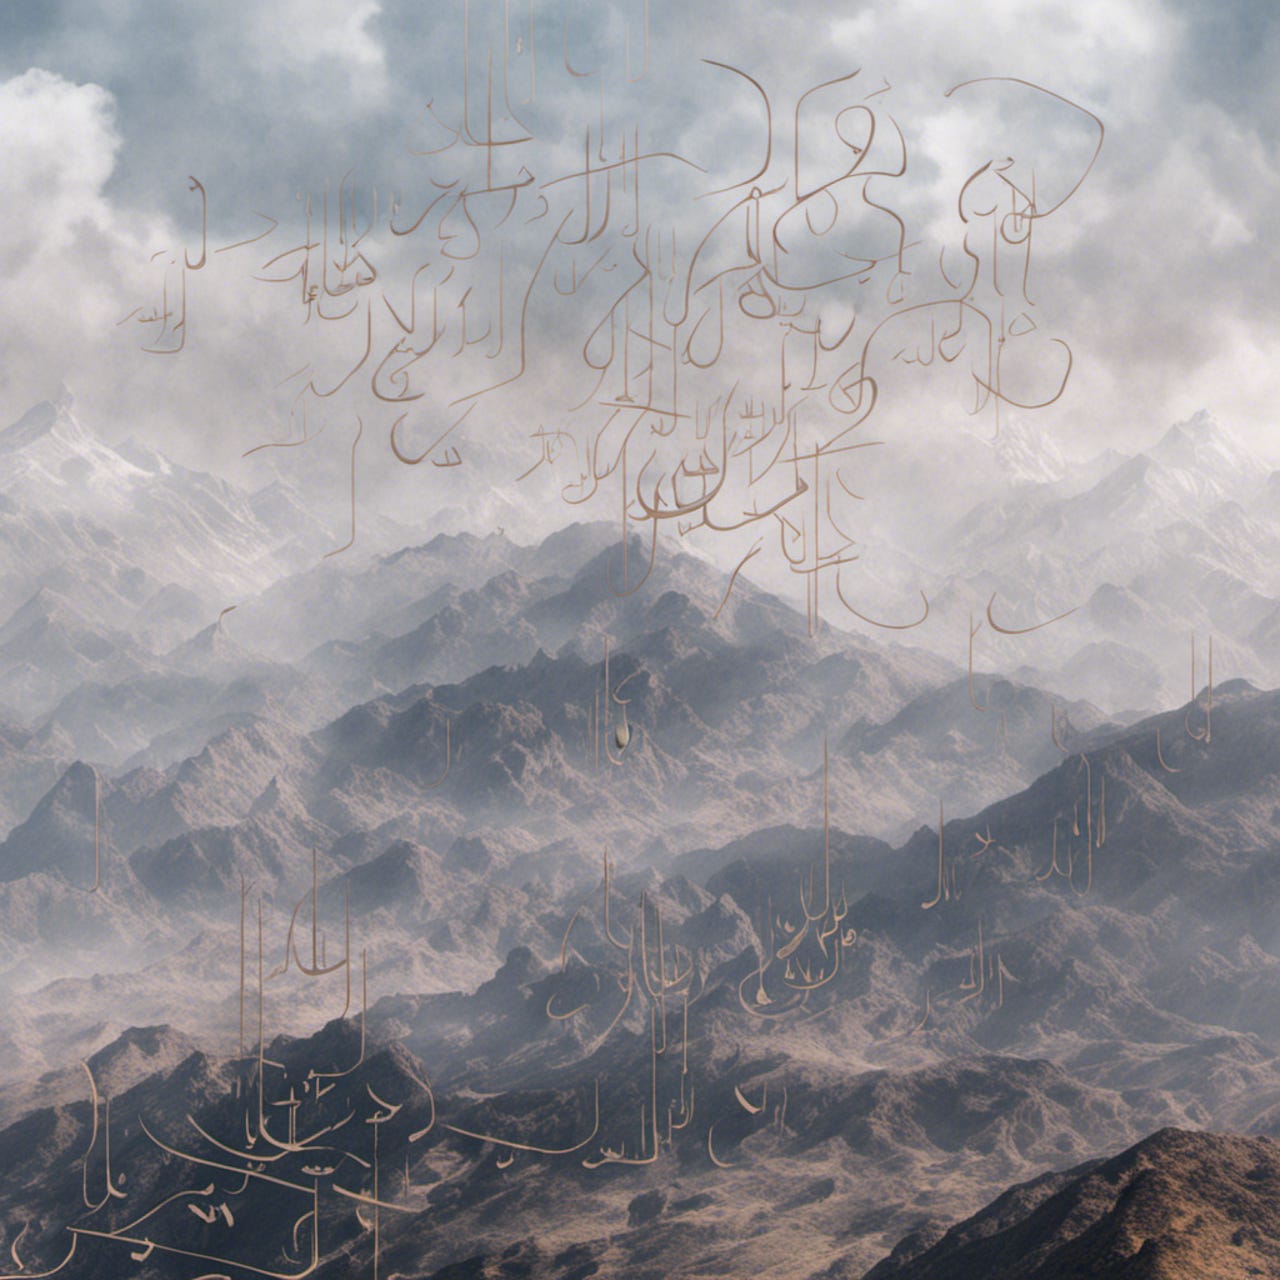 neural-net-as-calligraphy-2.png